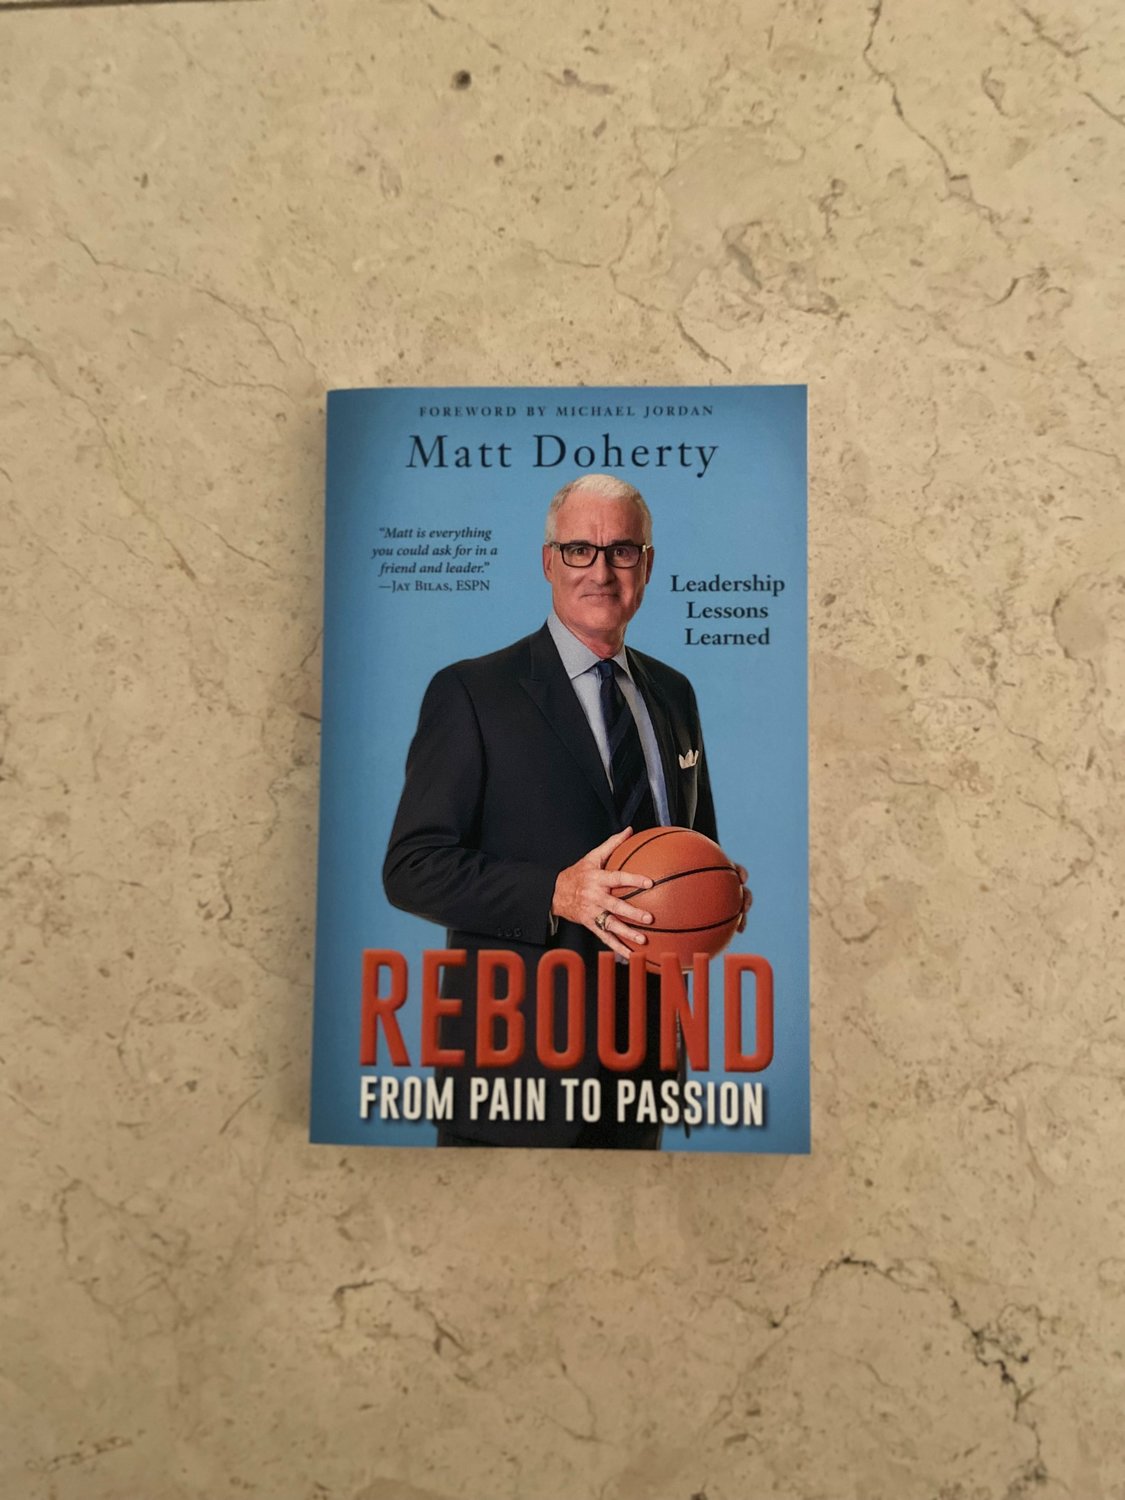 Doherty shares his good and bad basketball moments in his new book.